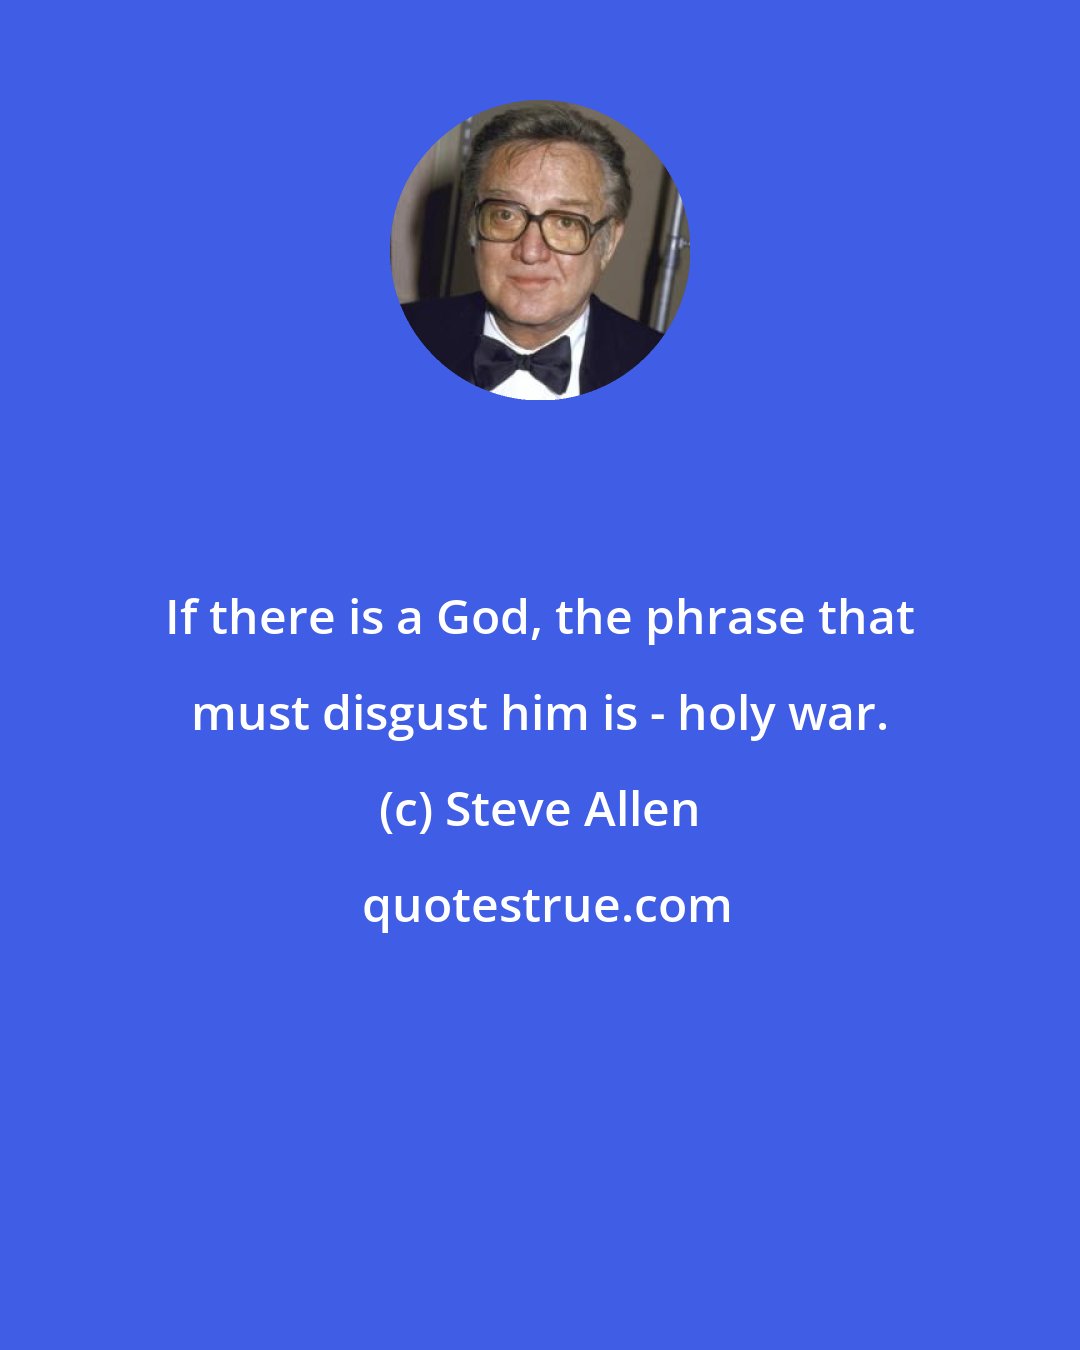 Steve Allen: If there is a God, the phrase that must disgust him is - holy war.